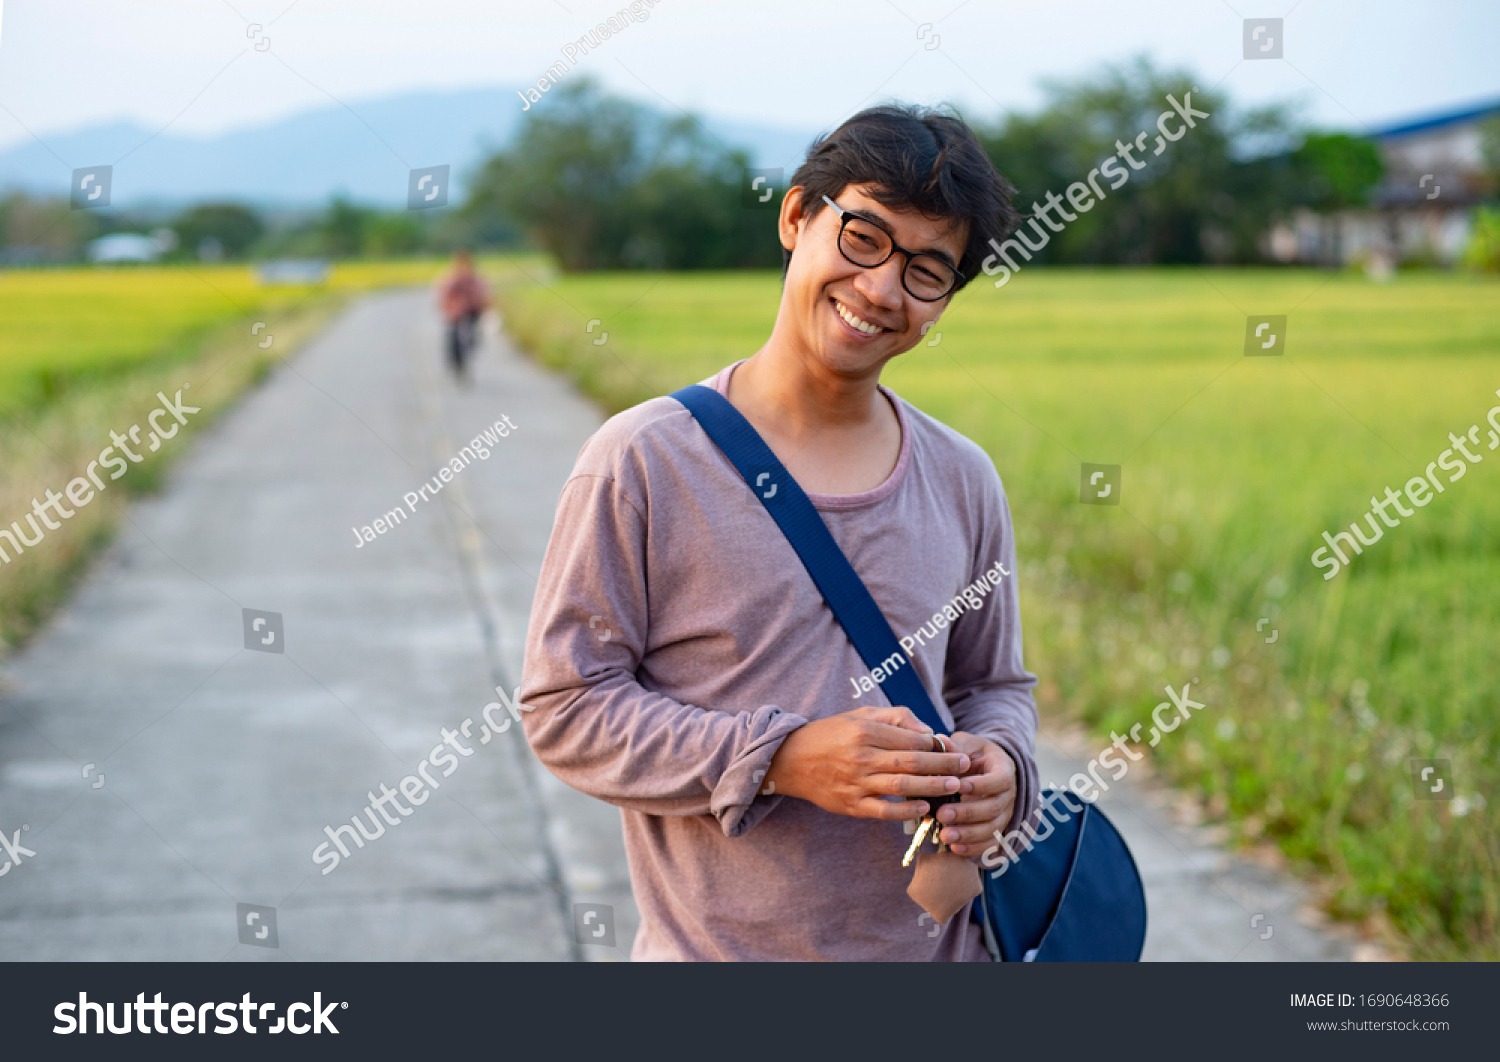 Portrait of an Asian Thai man looking humble and relaxed surrounded by rice field and in the background there is an unknown person riding a bicycle #1690648366